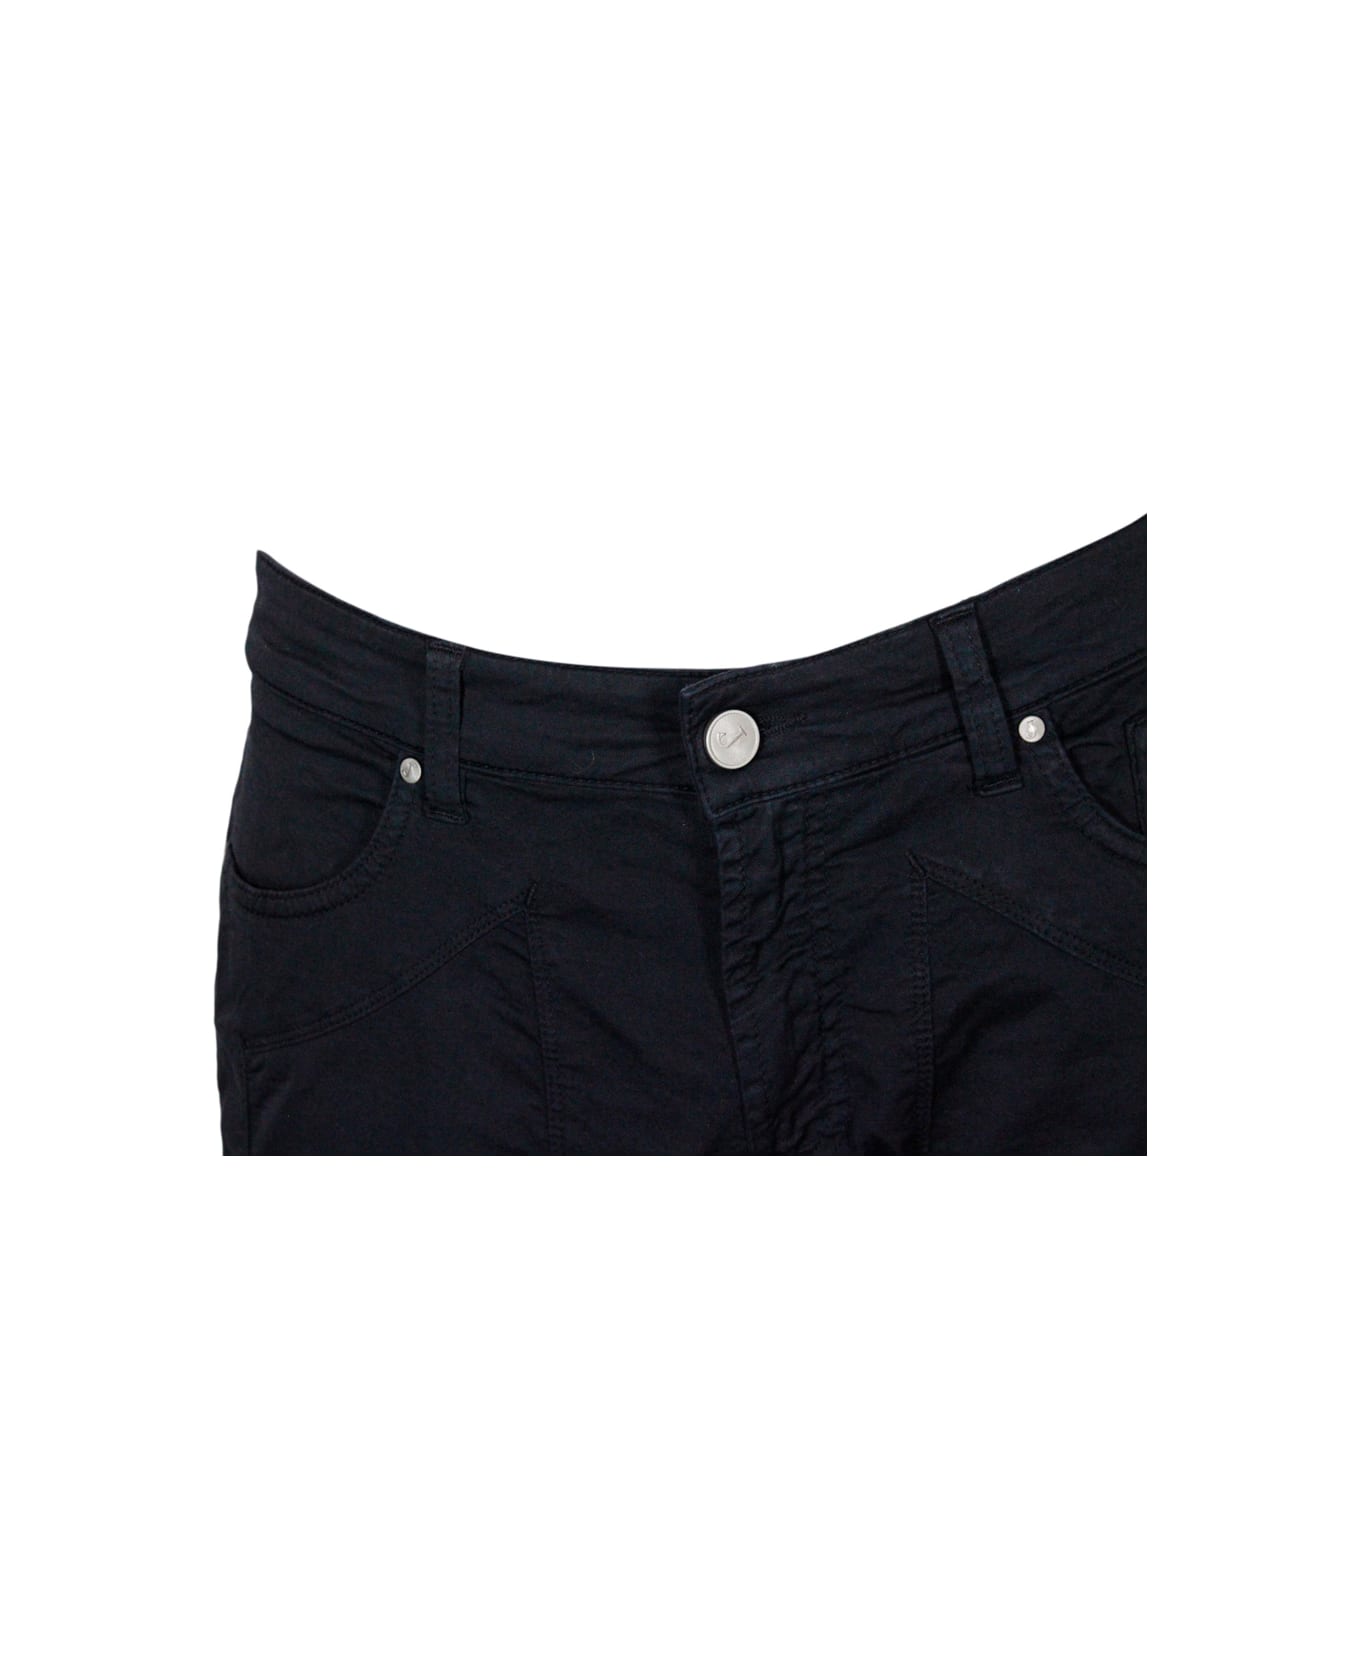 Jeckerson Bermuda Shorts In Slim Cotton Gabardine With 5 Pockets With Button And Zip Closure With Tone-on-tone Front Patch - Navy